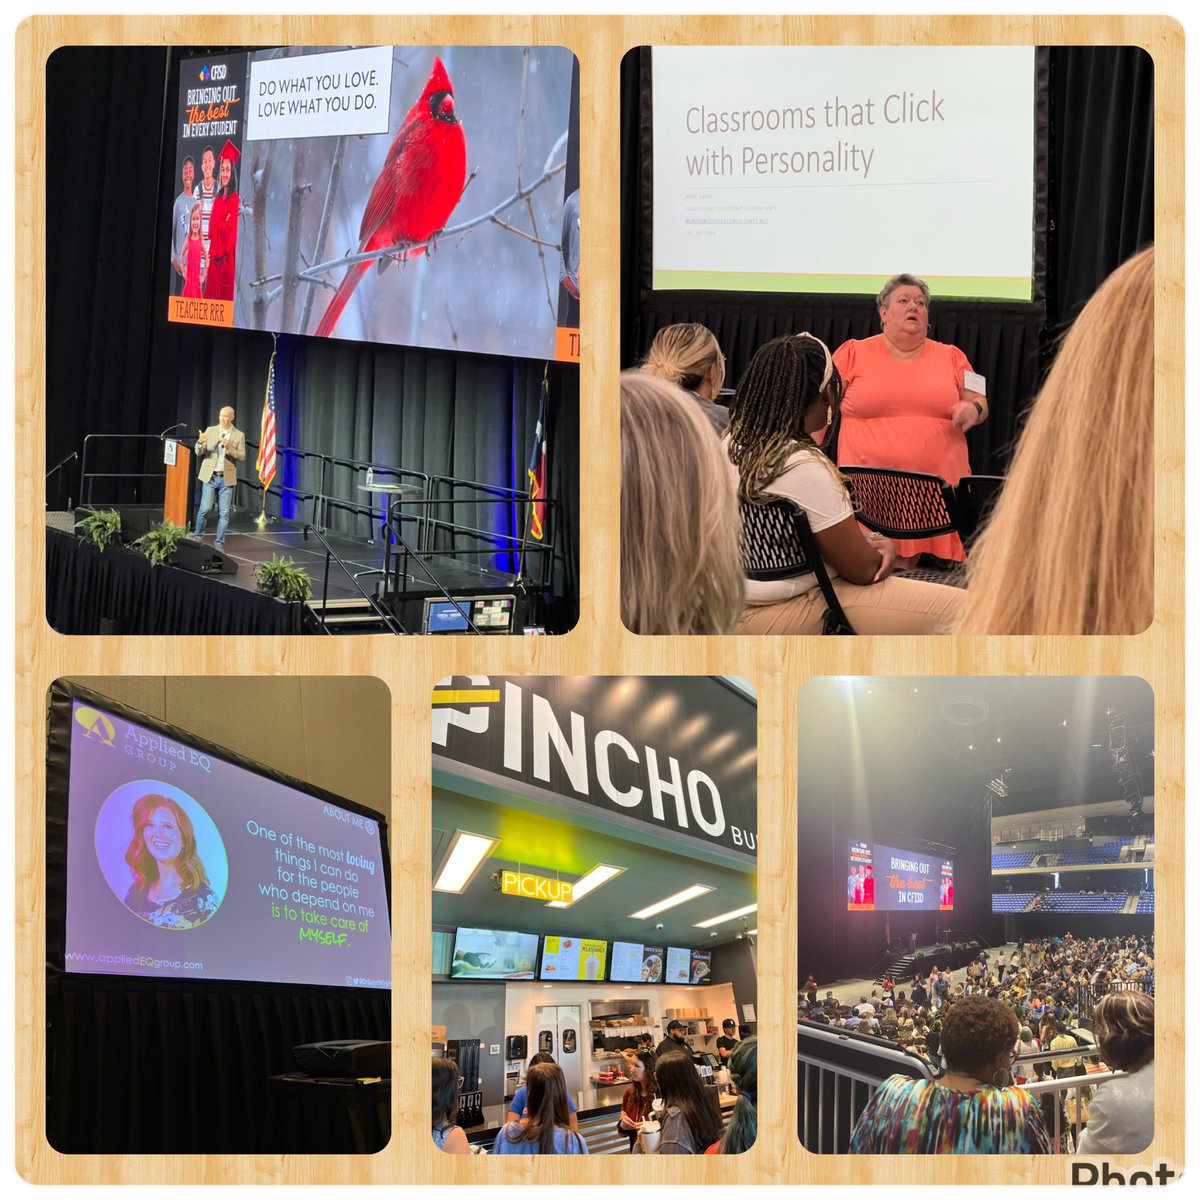 Great speakers and sessions to focus on what you love, your mental health, and focus on “one more.” @CyFairISD @CFISDAndre @CFISD_ELAR2_5 #LeopardsLEAD #2ndtoNone #cfisdelarpd @educationhall @DrSunniWinkler